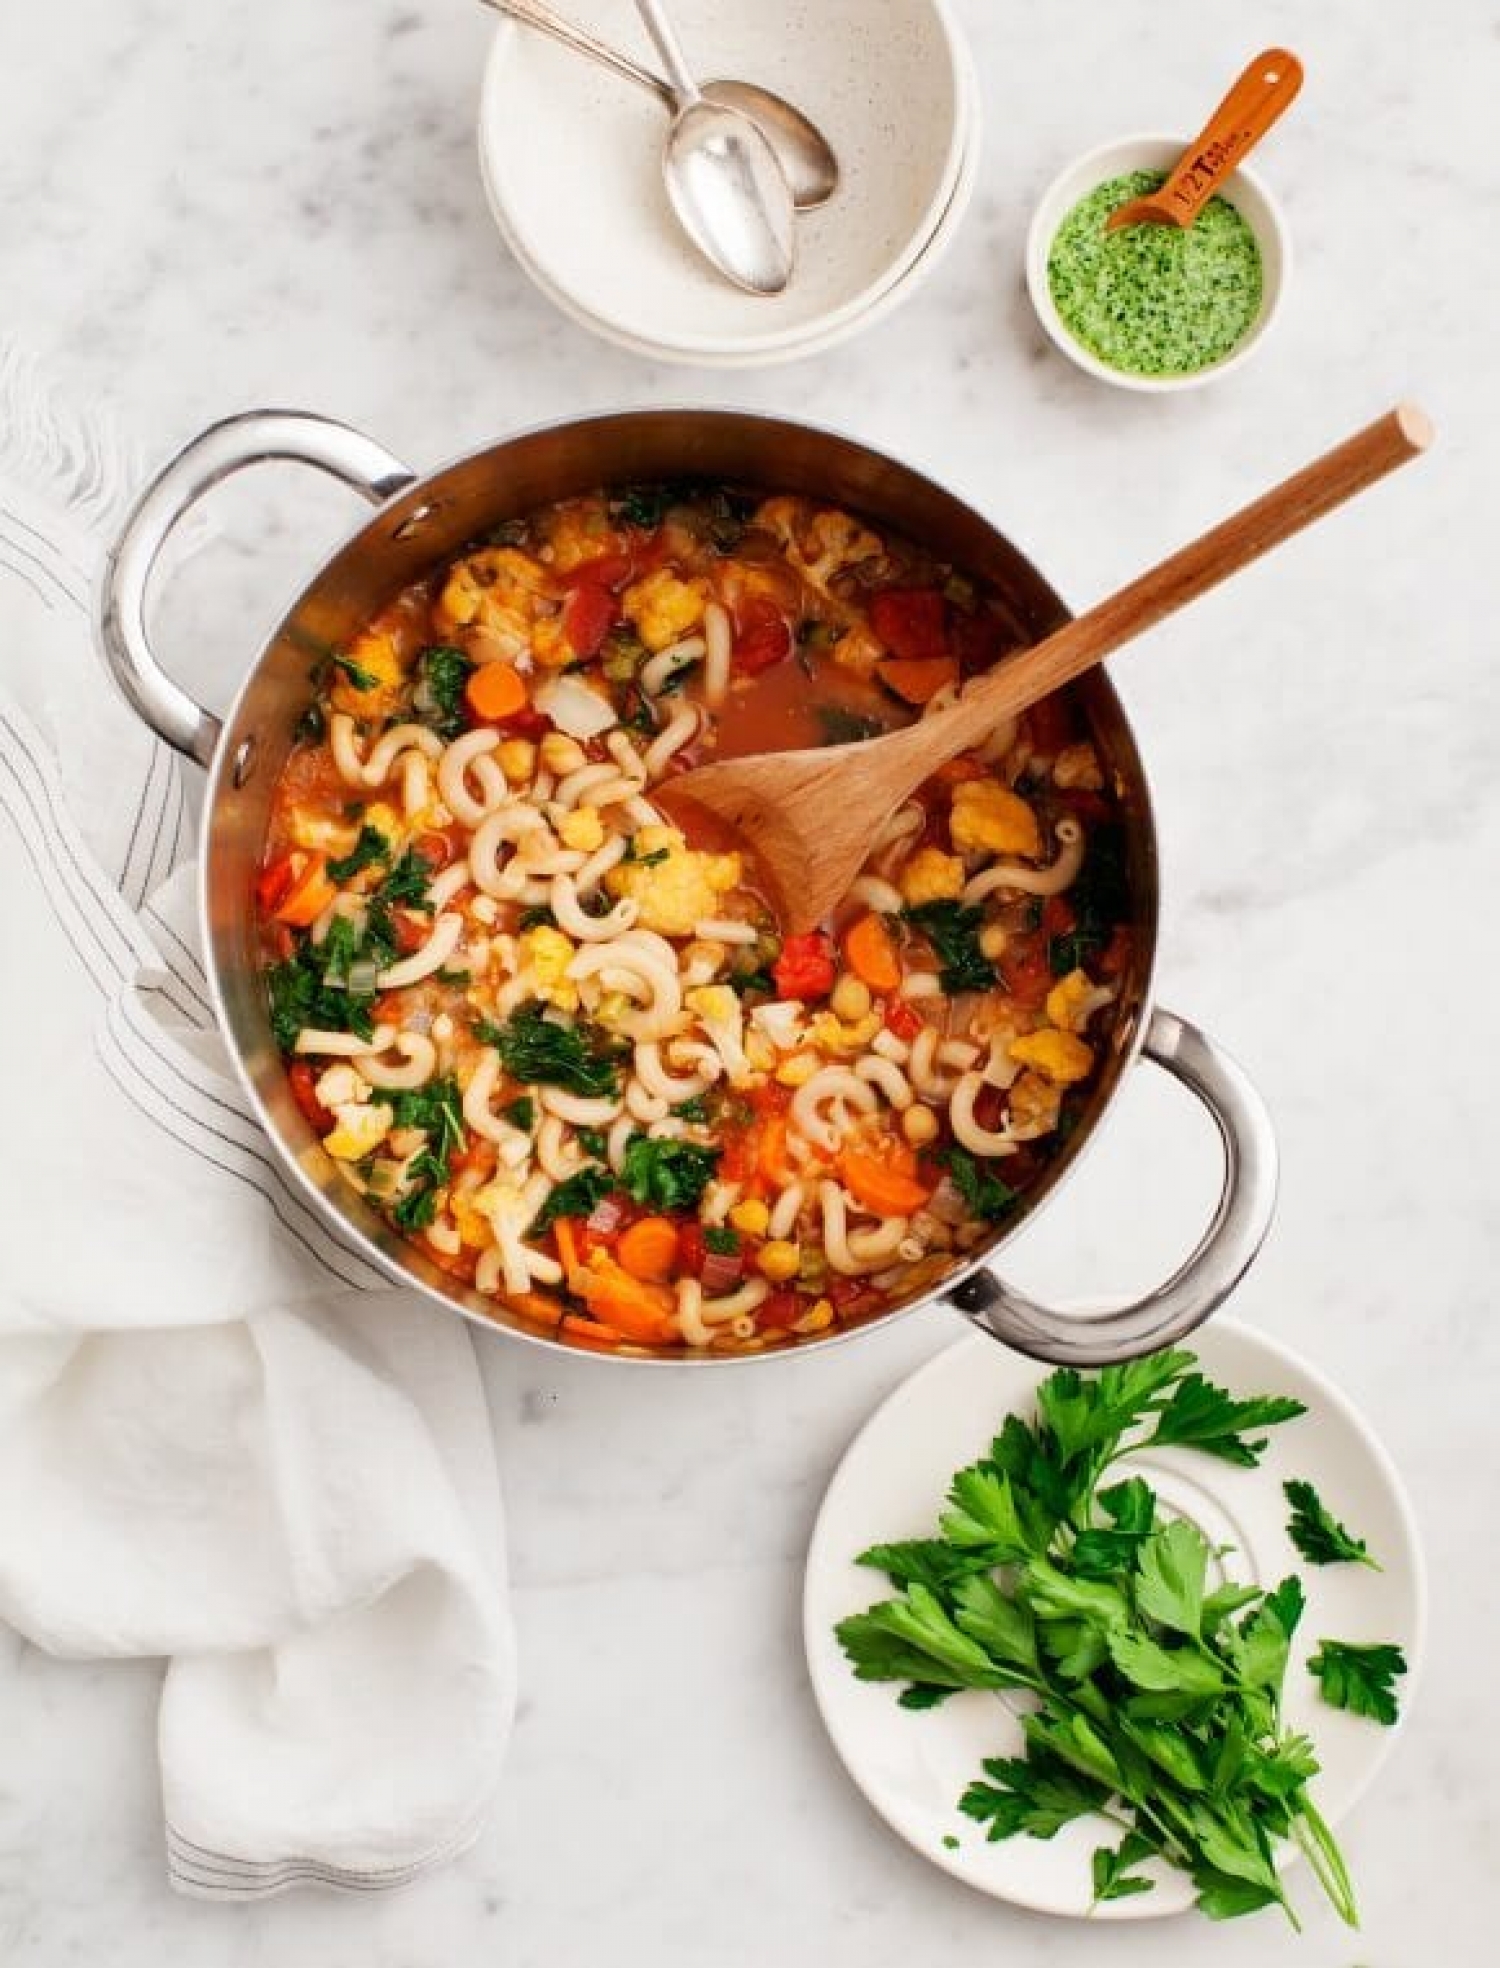 <p>Chickpeas (aka garbanzo beans), cauliflower and other veggies make up this beautiful vegetable stew that's light enough for spring meals. Serve with generous shavings of Parmesan cheese for a tangy finish. <a href="https://www.loveandlemons.com/chickpea-cauliflower-minestrone-soup/" rel="noopener">Get the recipe here.</a></p>